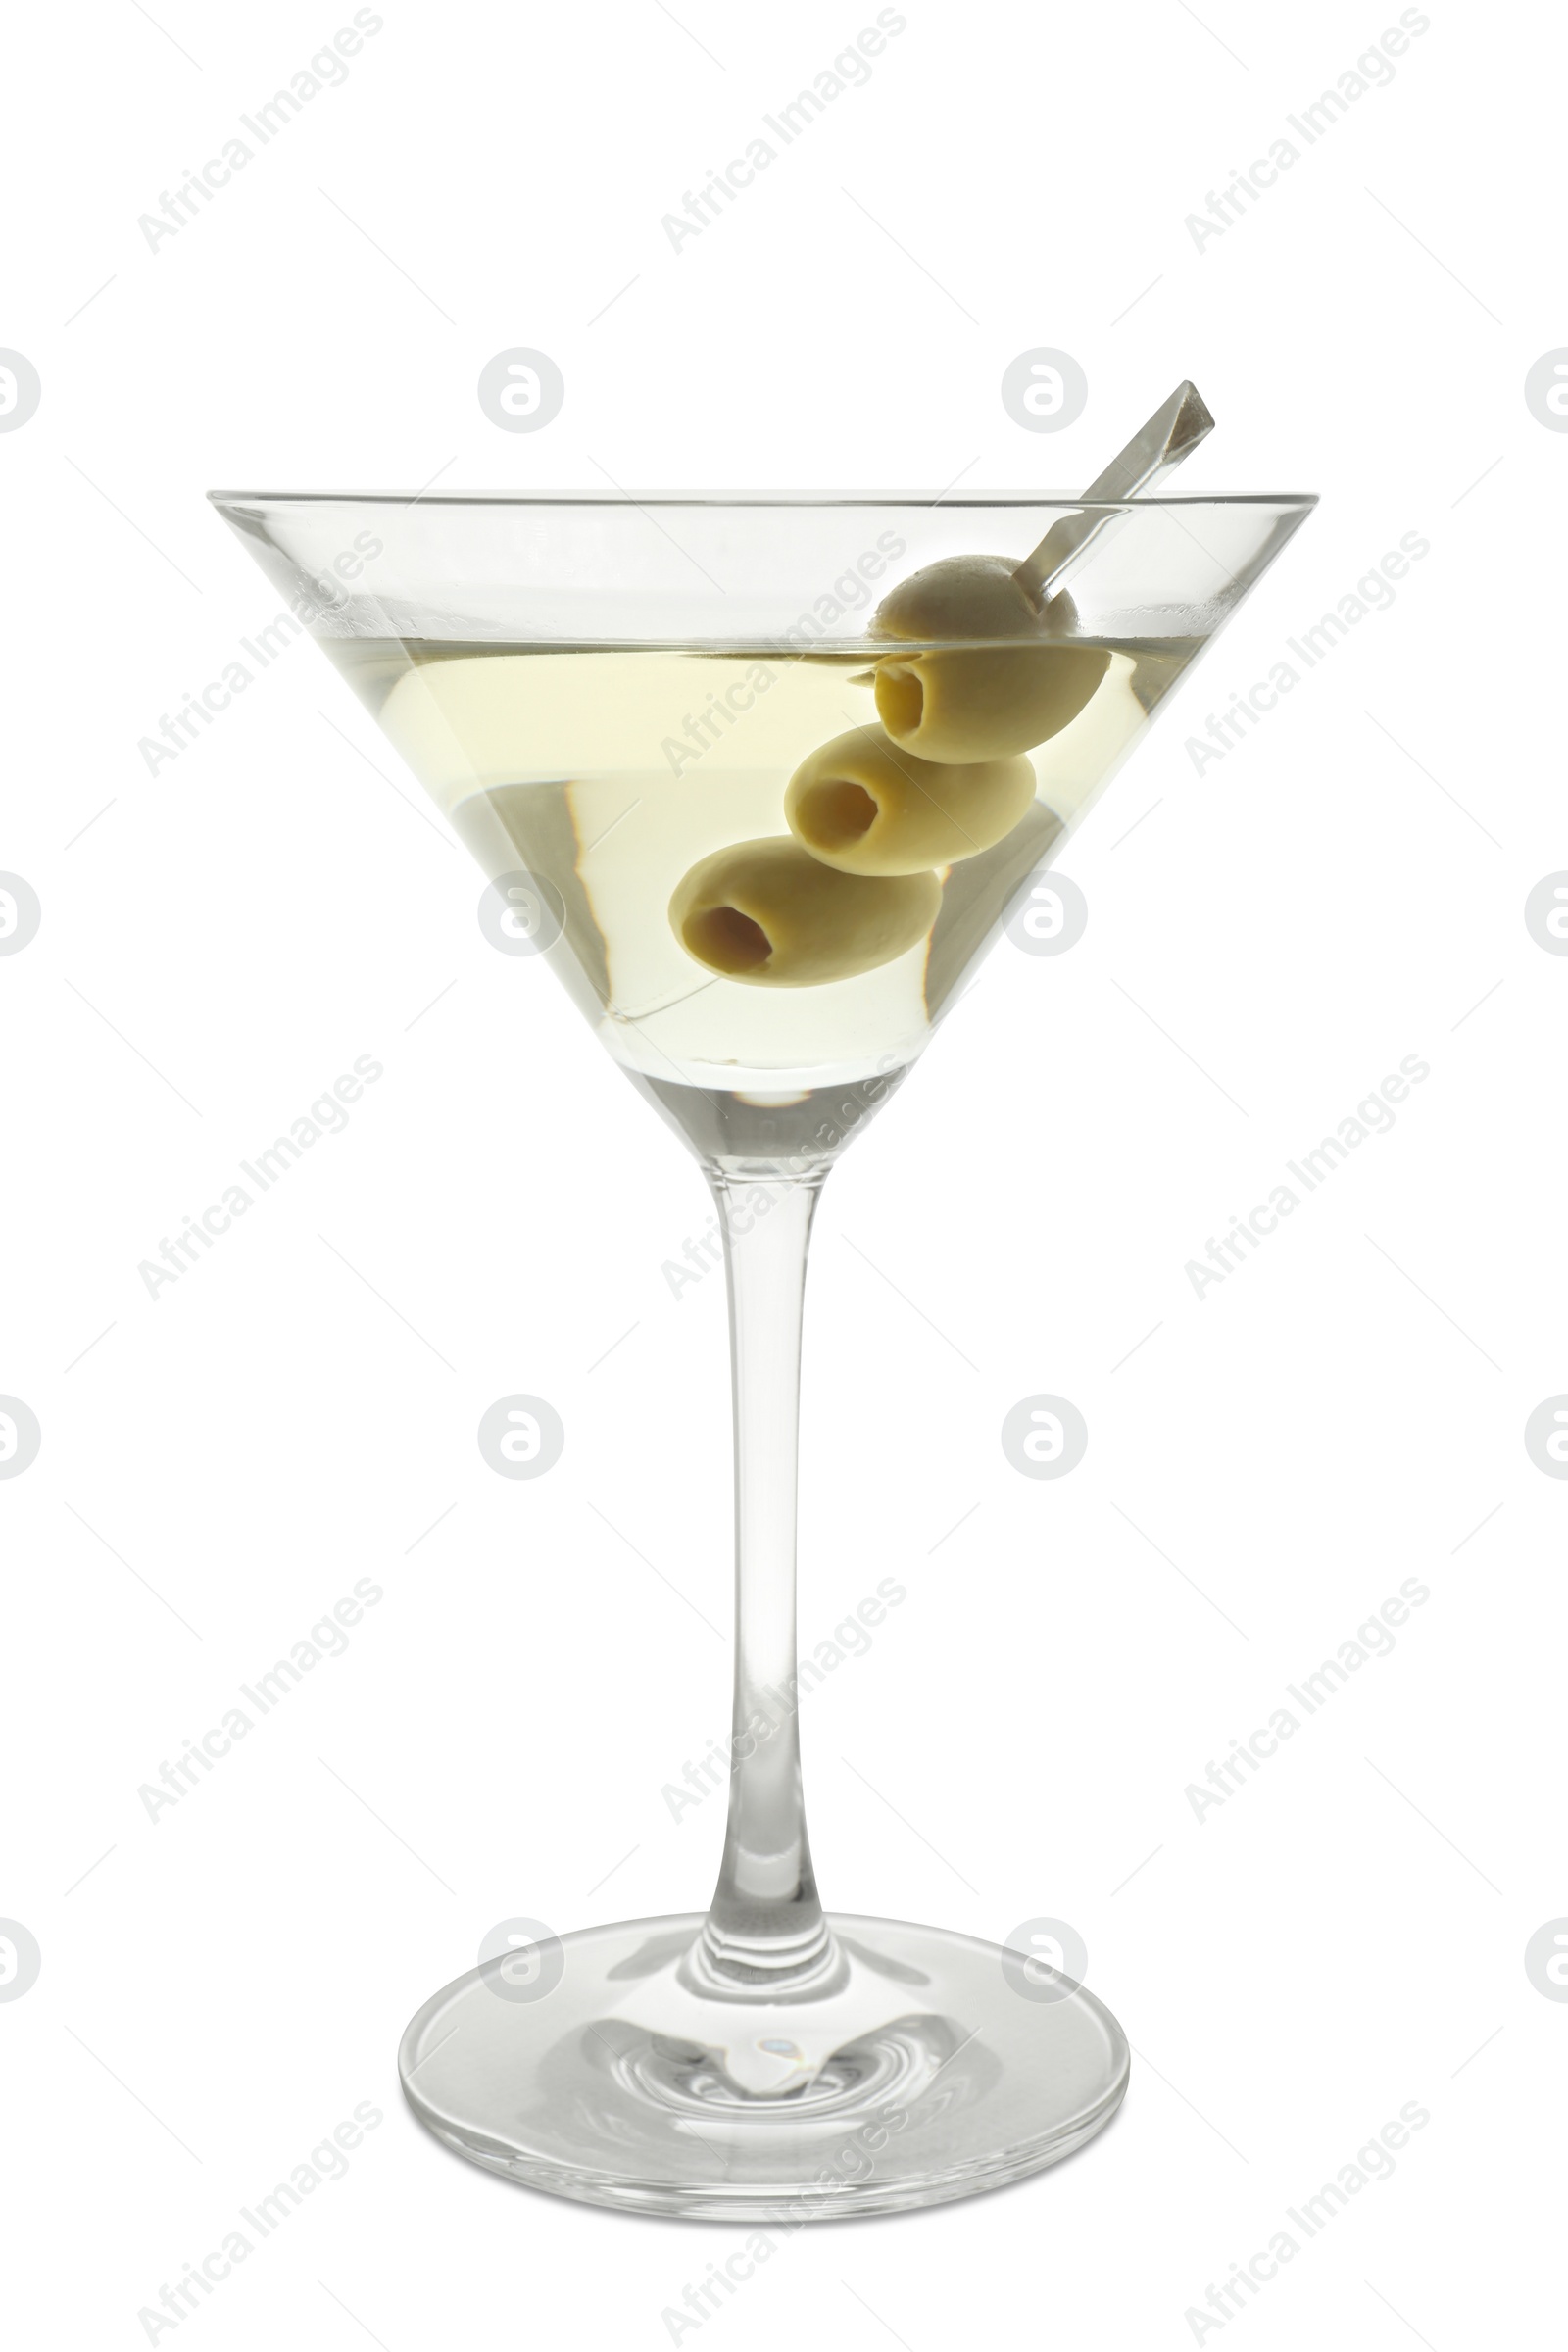 Photo of Glass of olive martini on white background